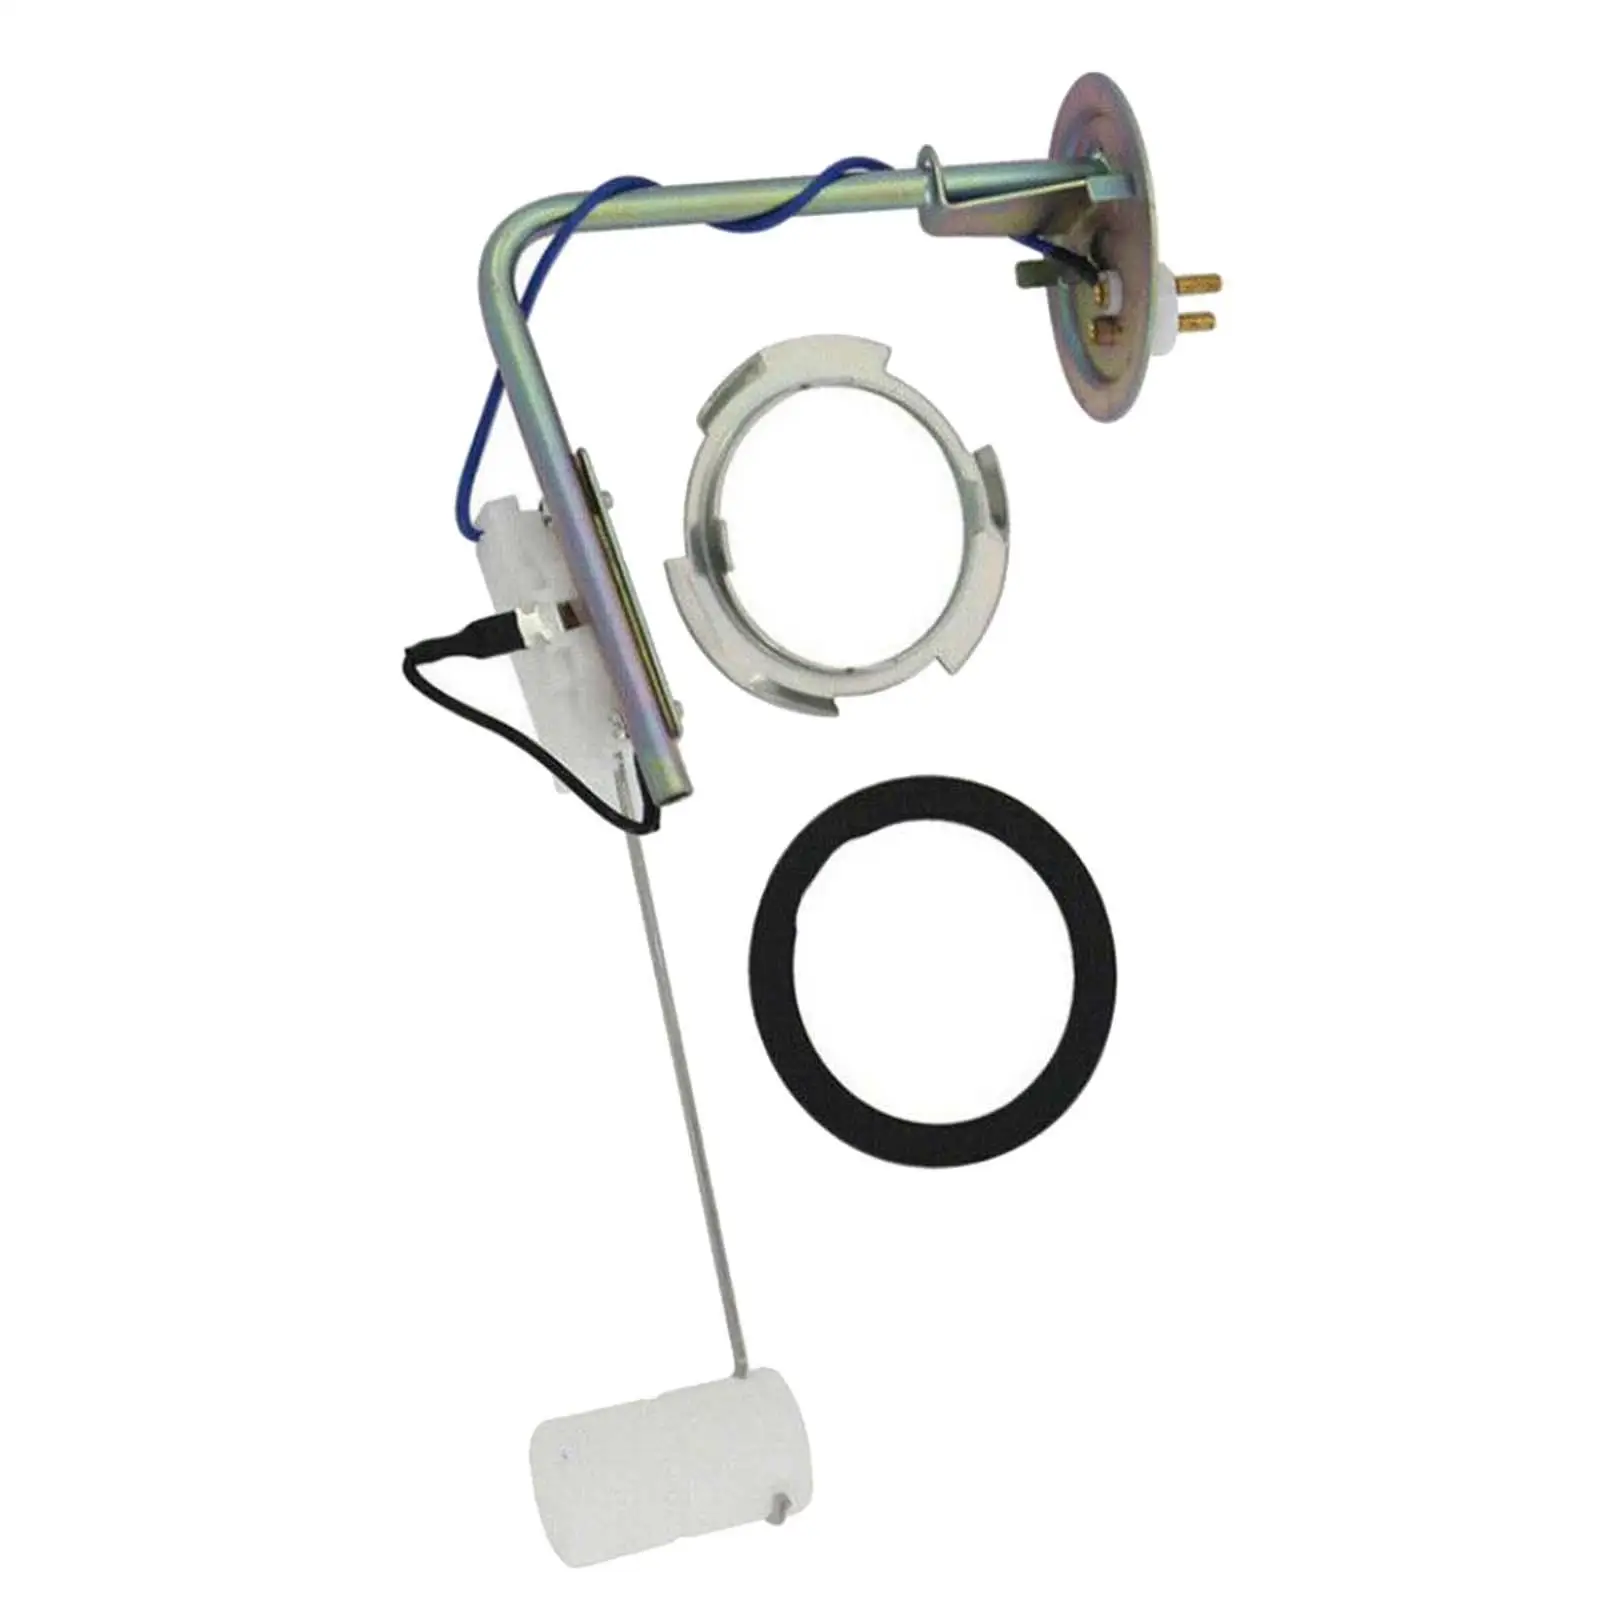 Fuel Pump Sender Easy to Install Accessories Replaces Professional Durable E0LY-9275-b 539GE for Lincoln Mercury 1980-1989